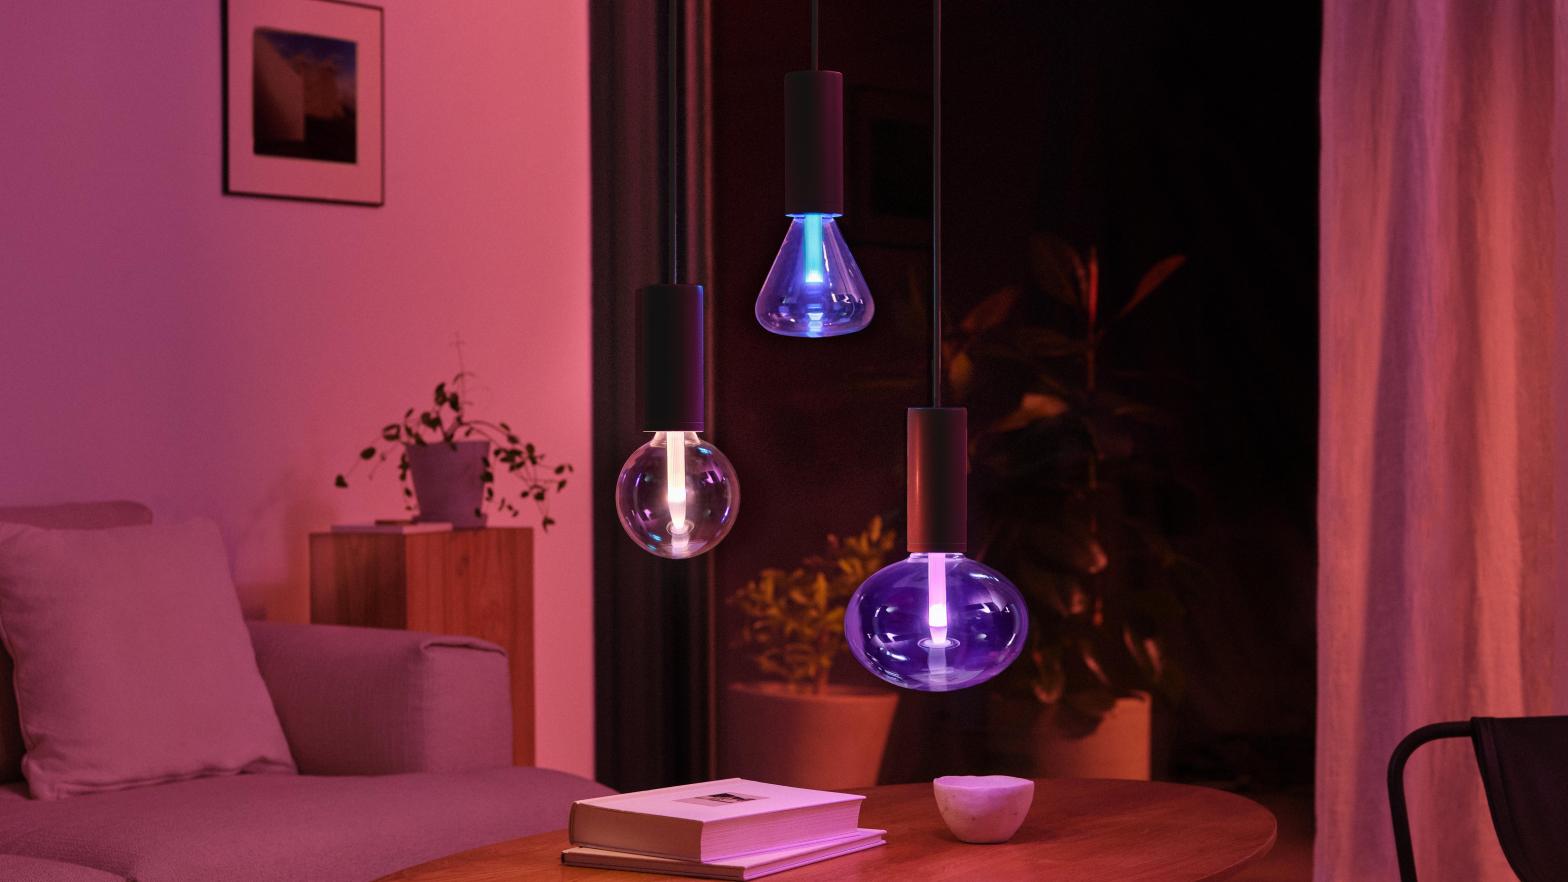 The new Philips Hue Lightguide bulbs come in three sleek shapes. (Image: Signify)